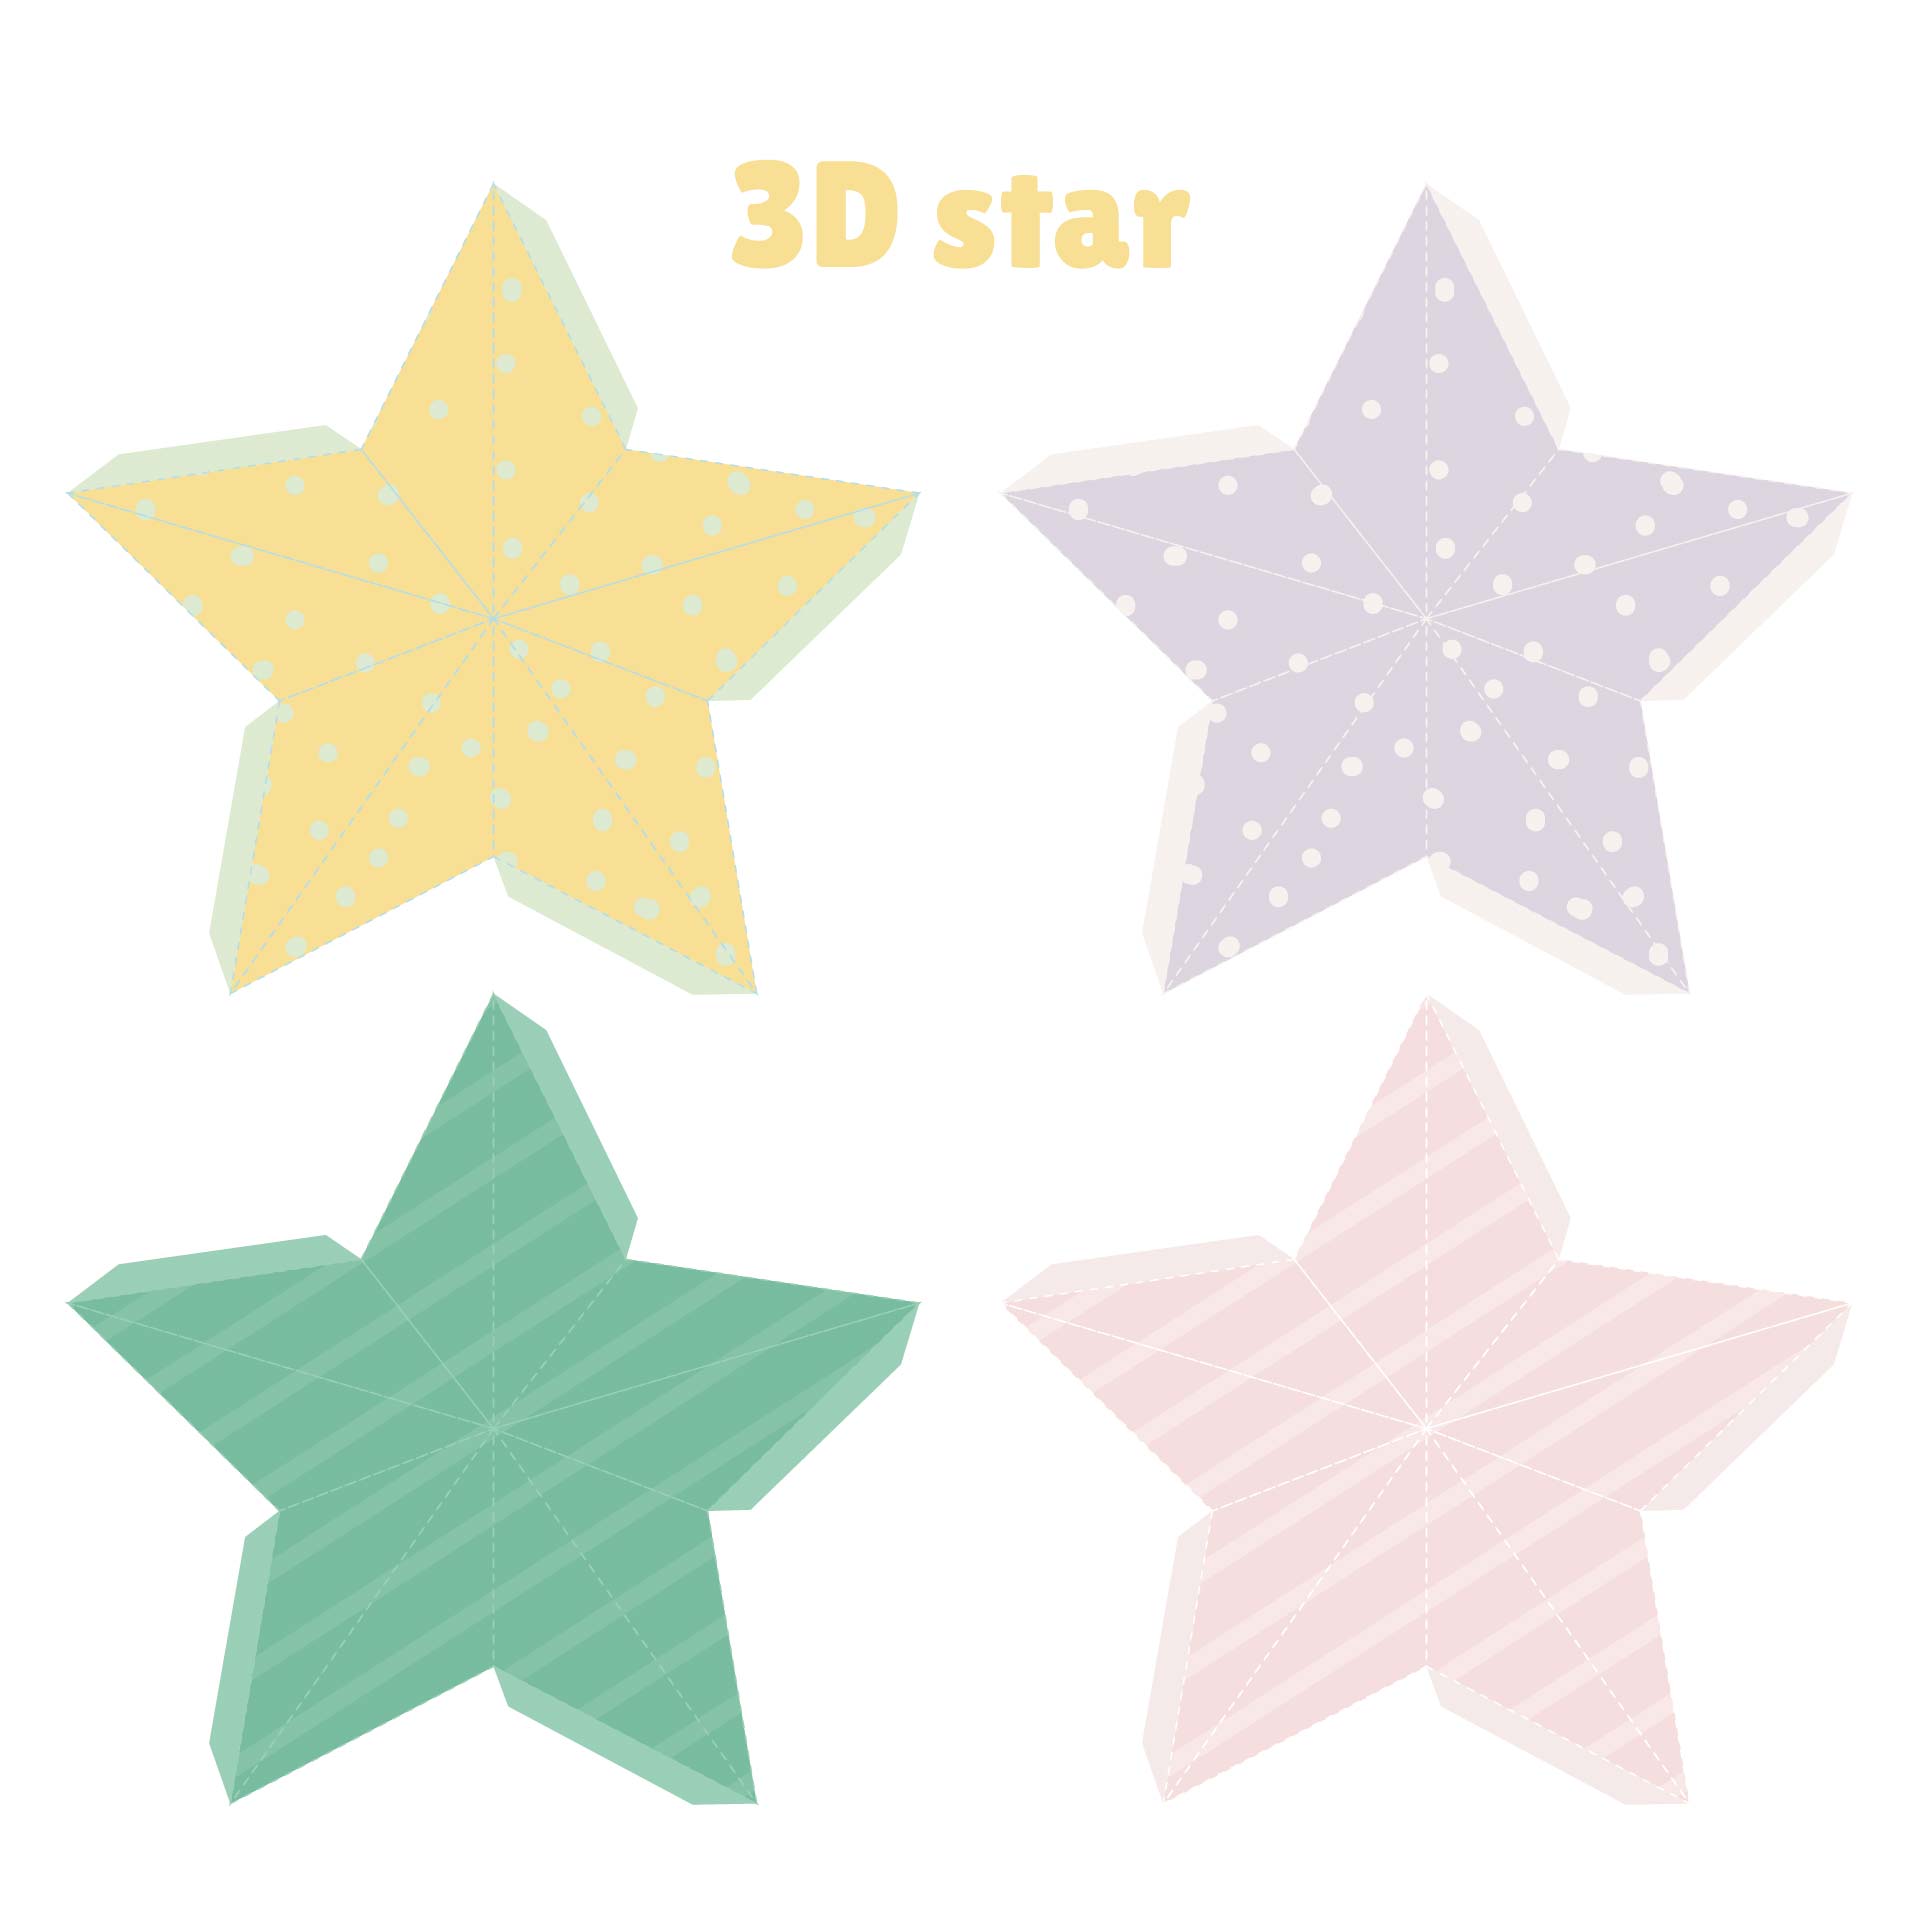 10-best-3d-star-printable-template-for-free-at-printablee